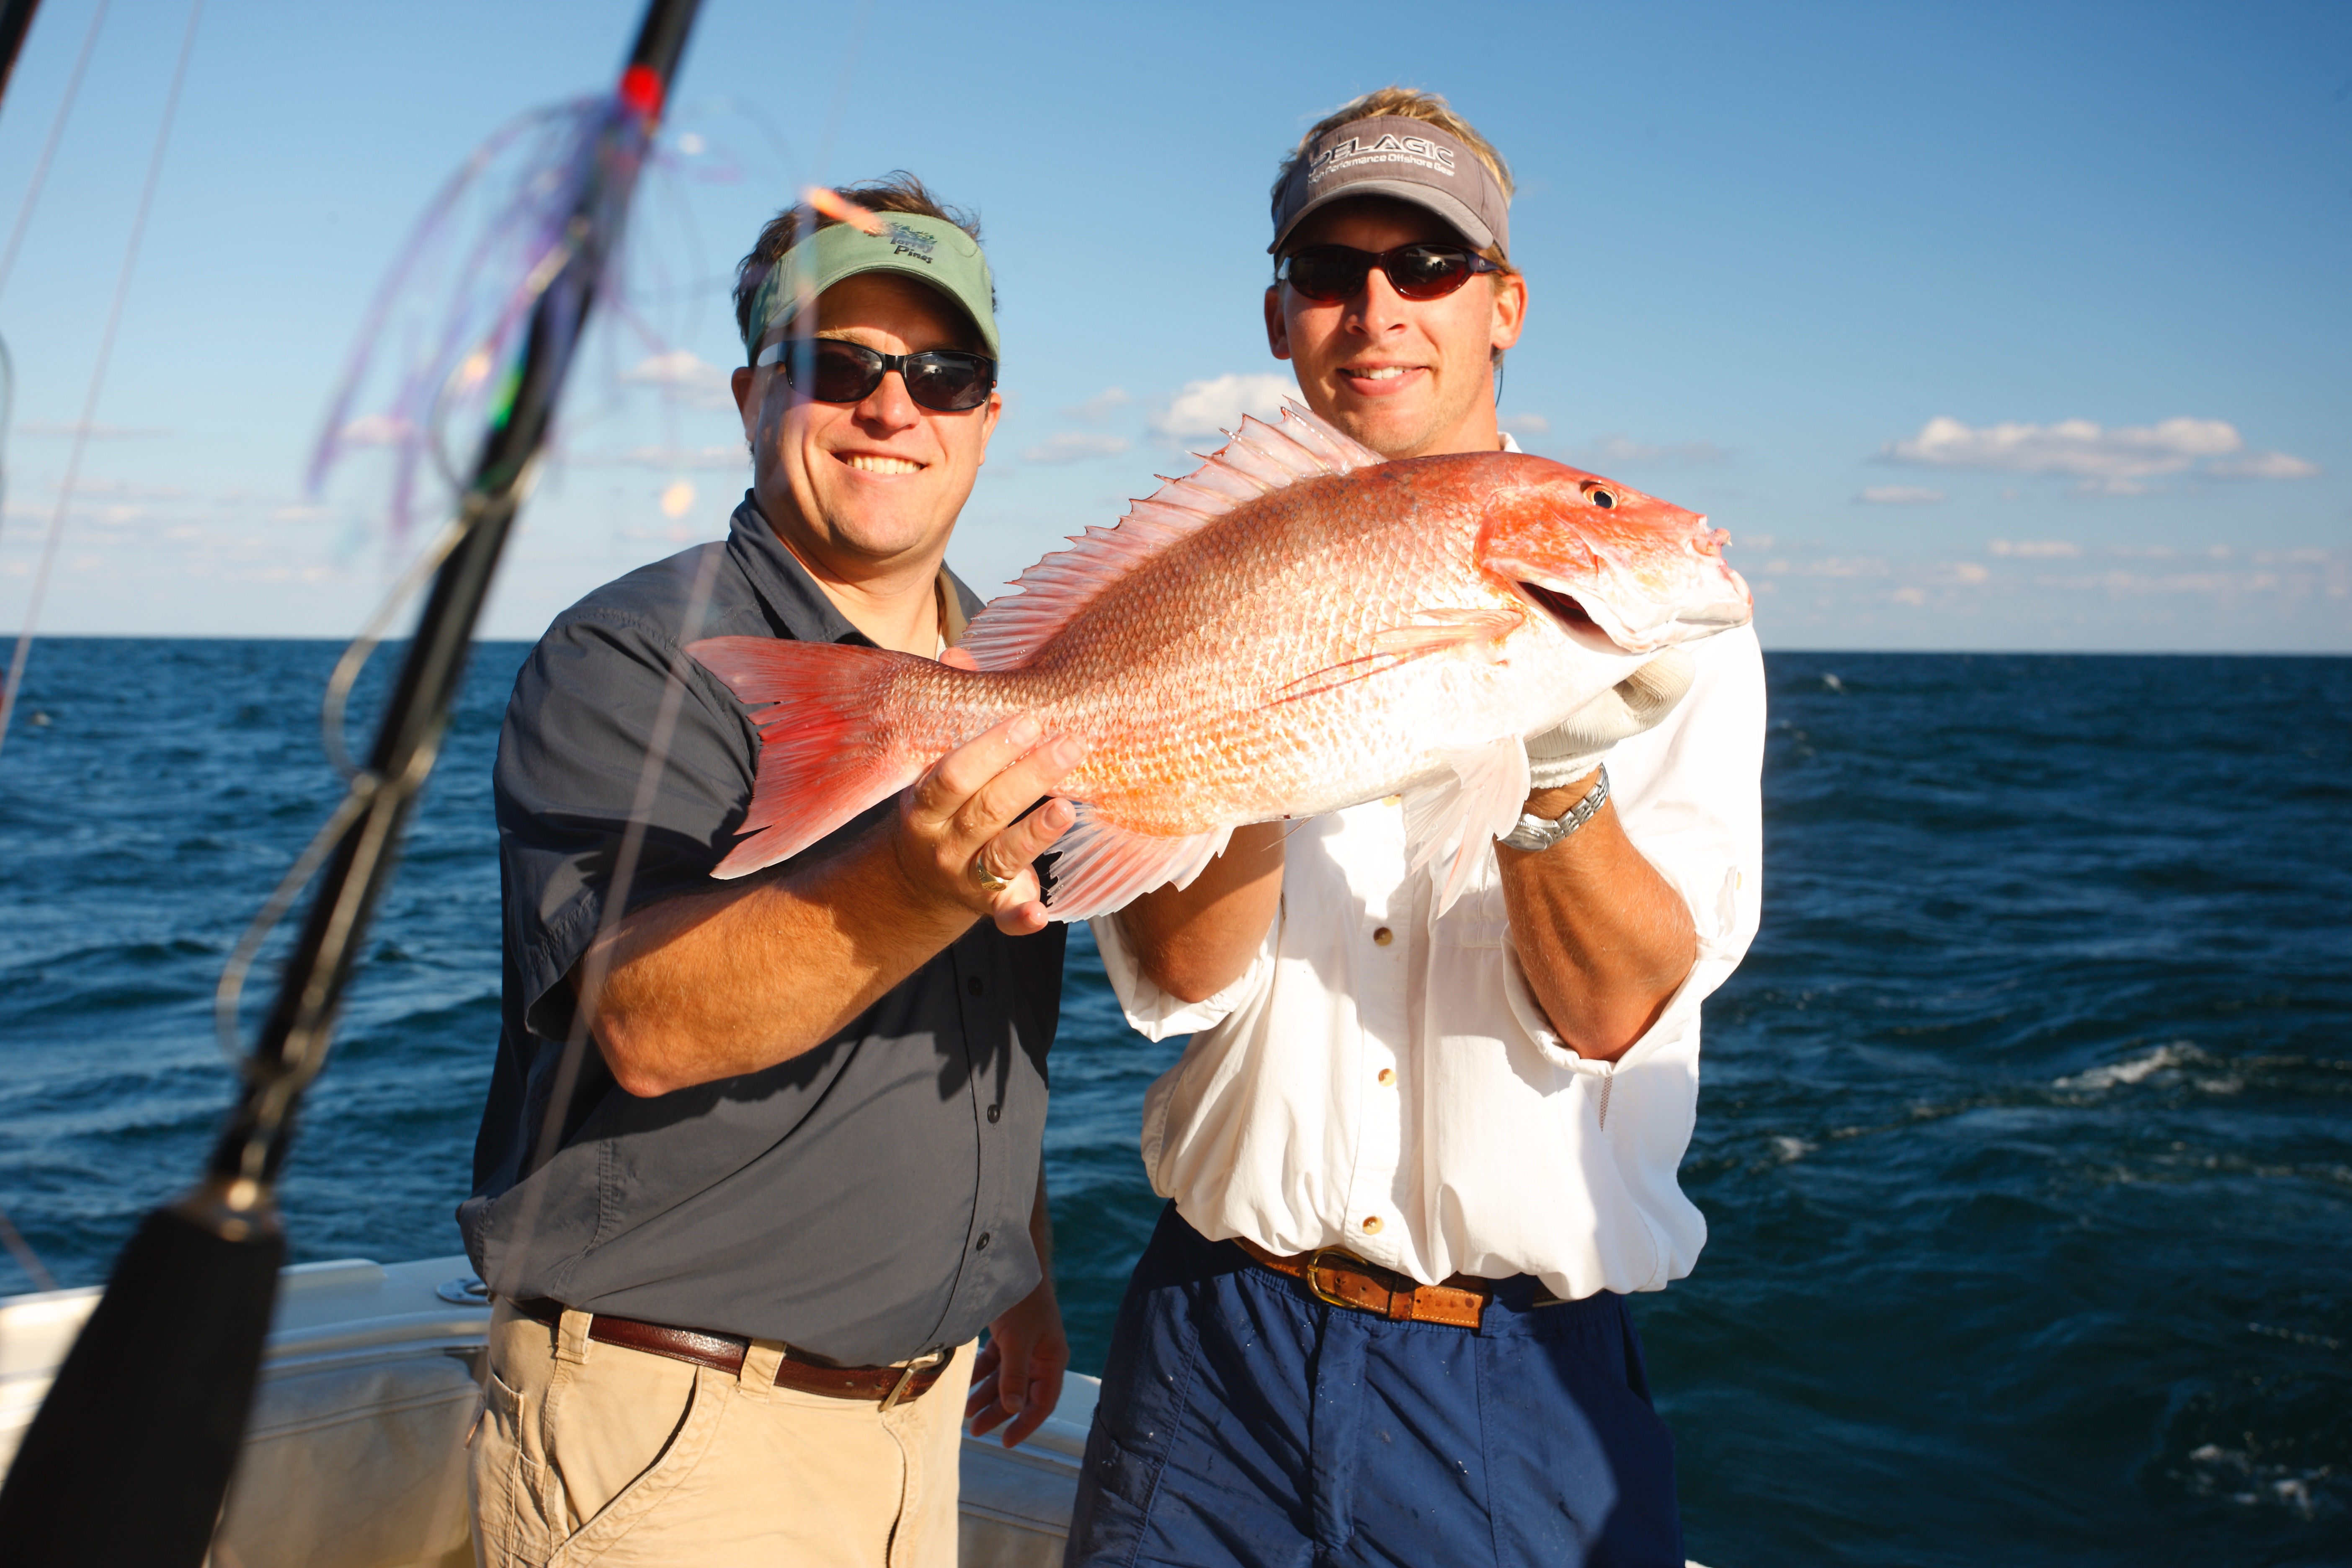 Gulf Shores, Sport Fishing and Deep Sea Fishing – The perfect combination